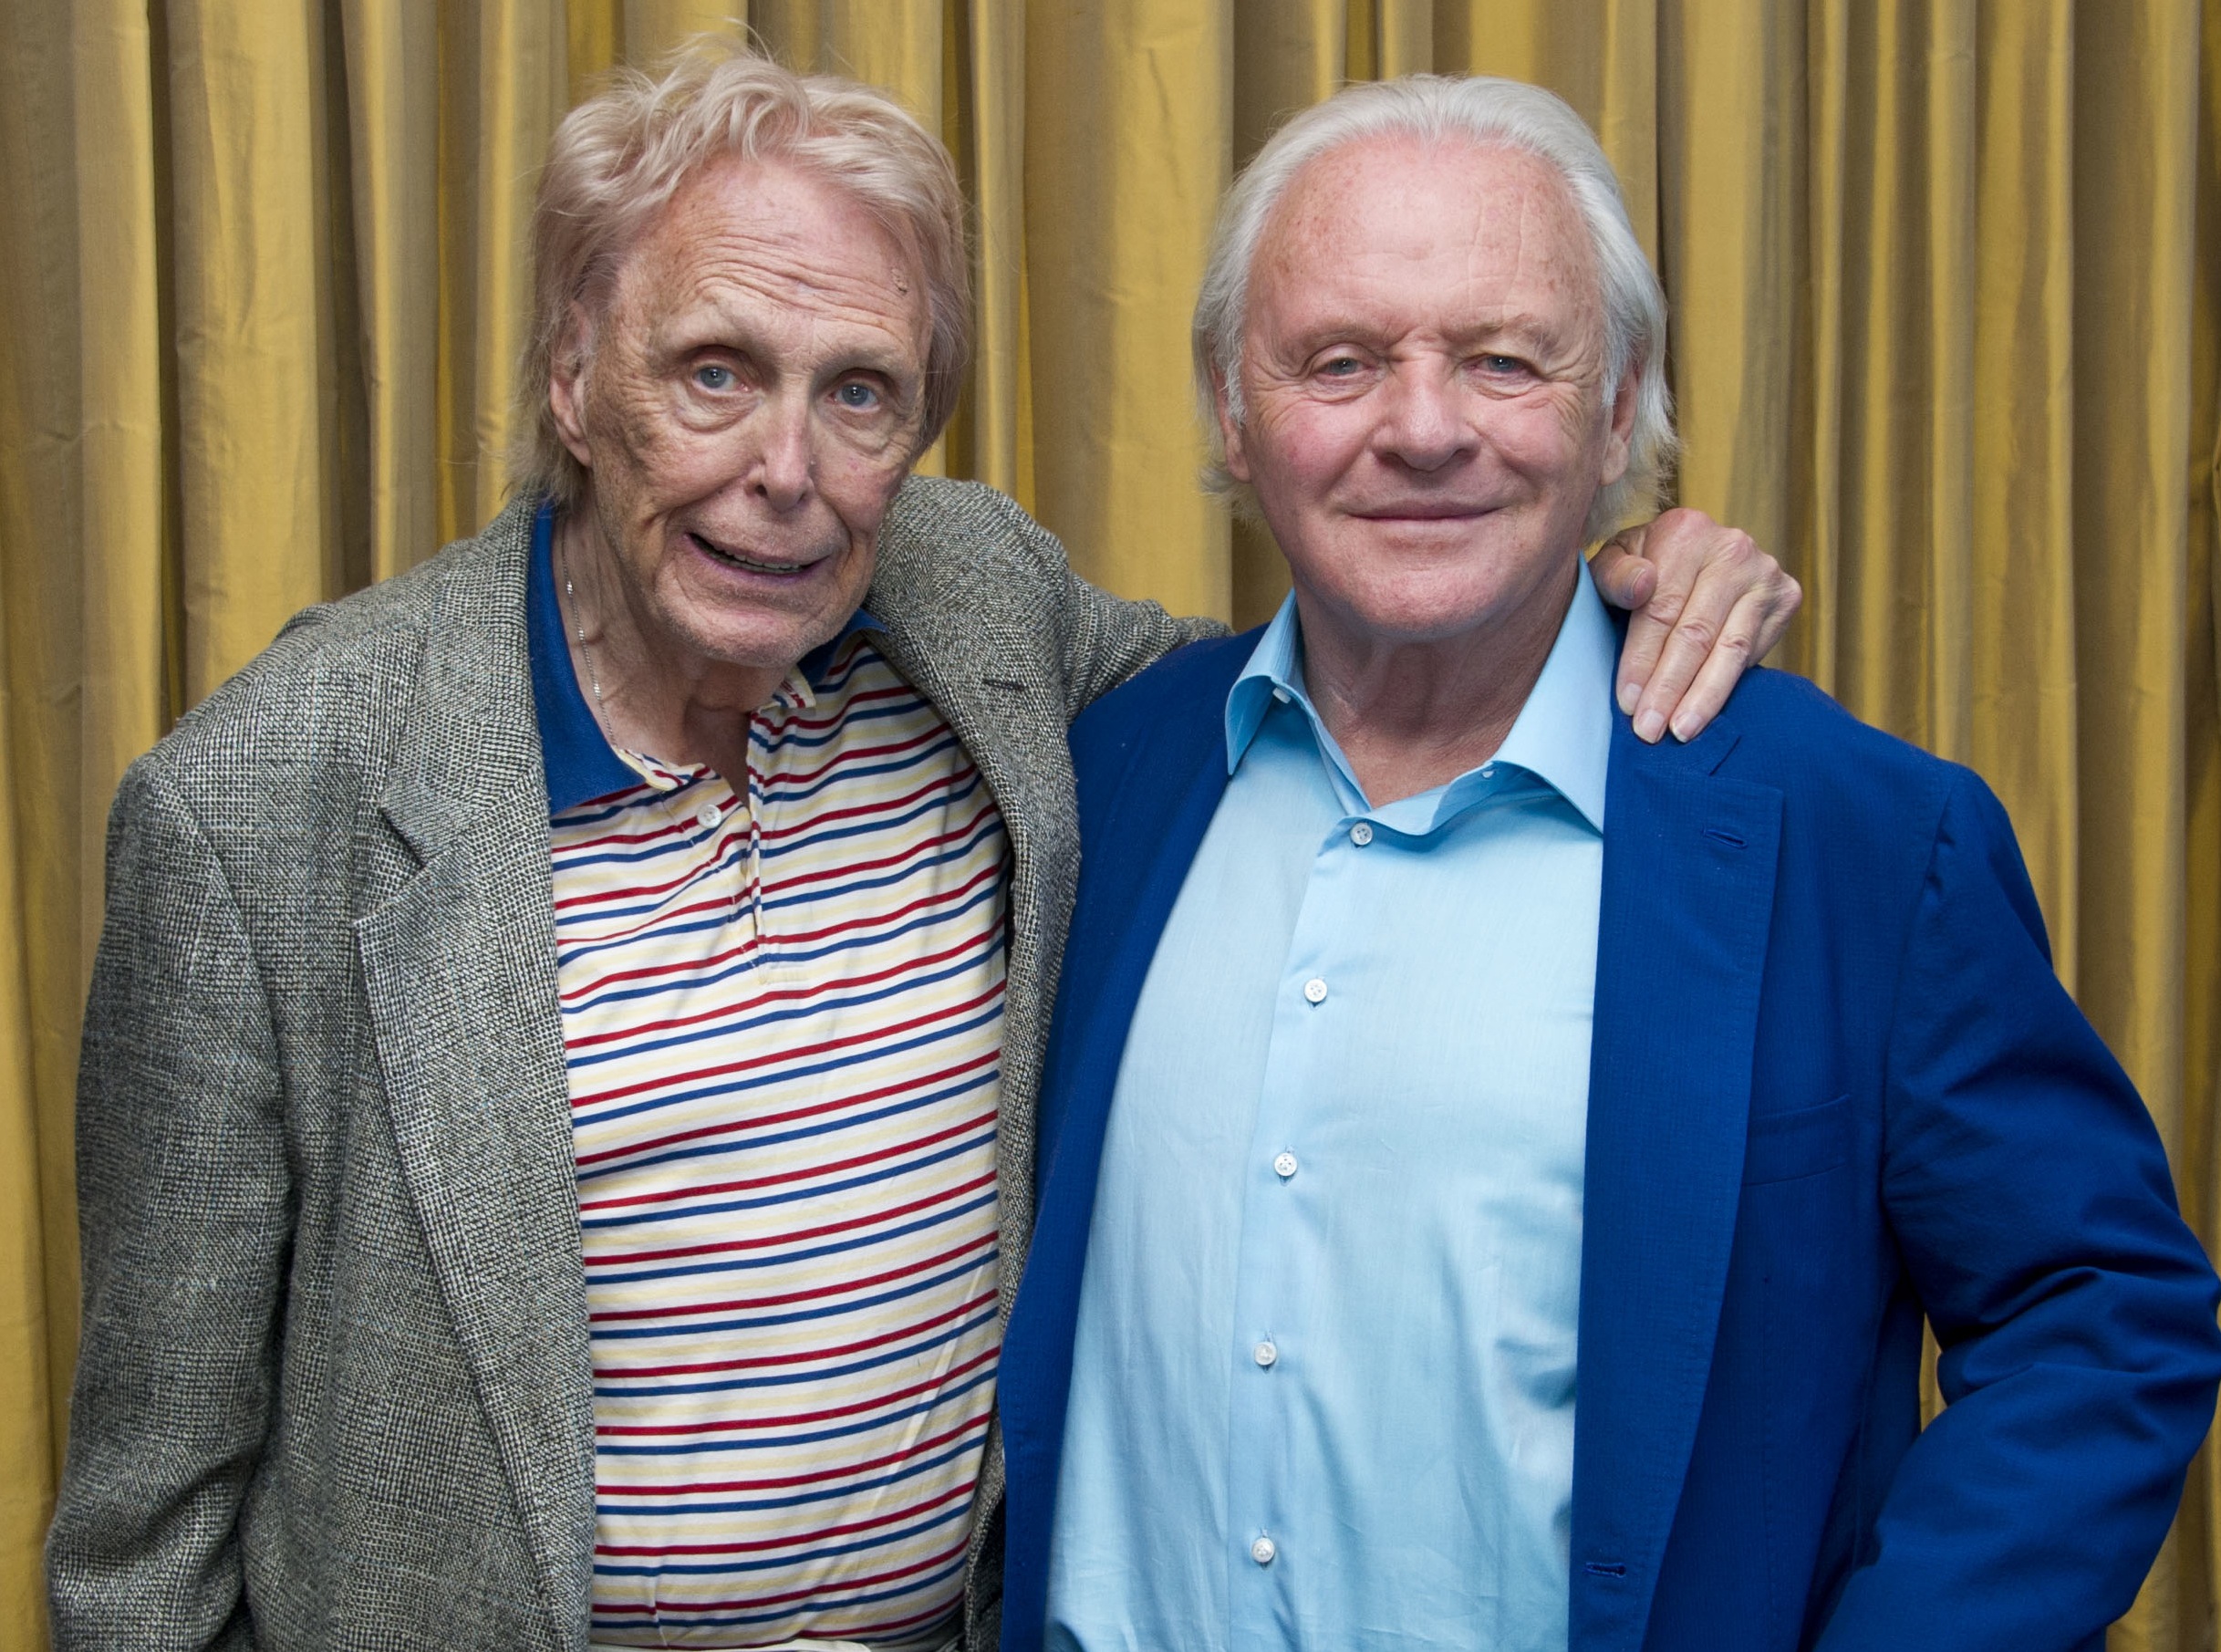 With Anthony Hopkins